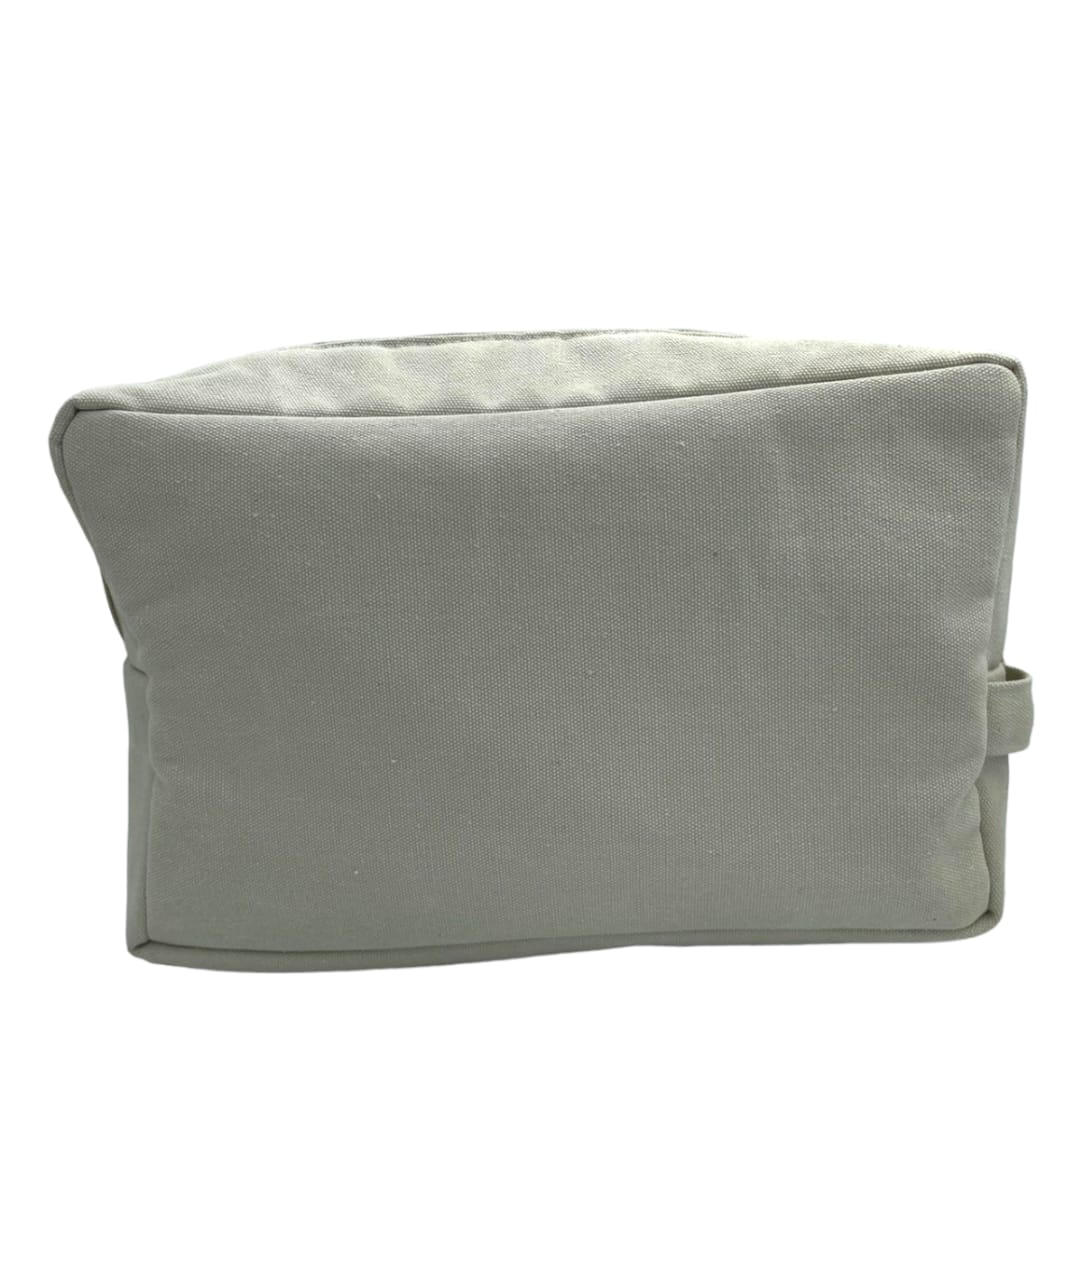 CANVAS TOILETRY BAG